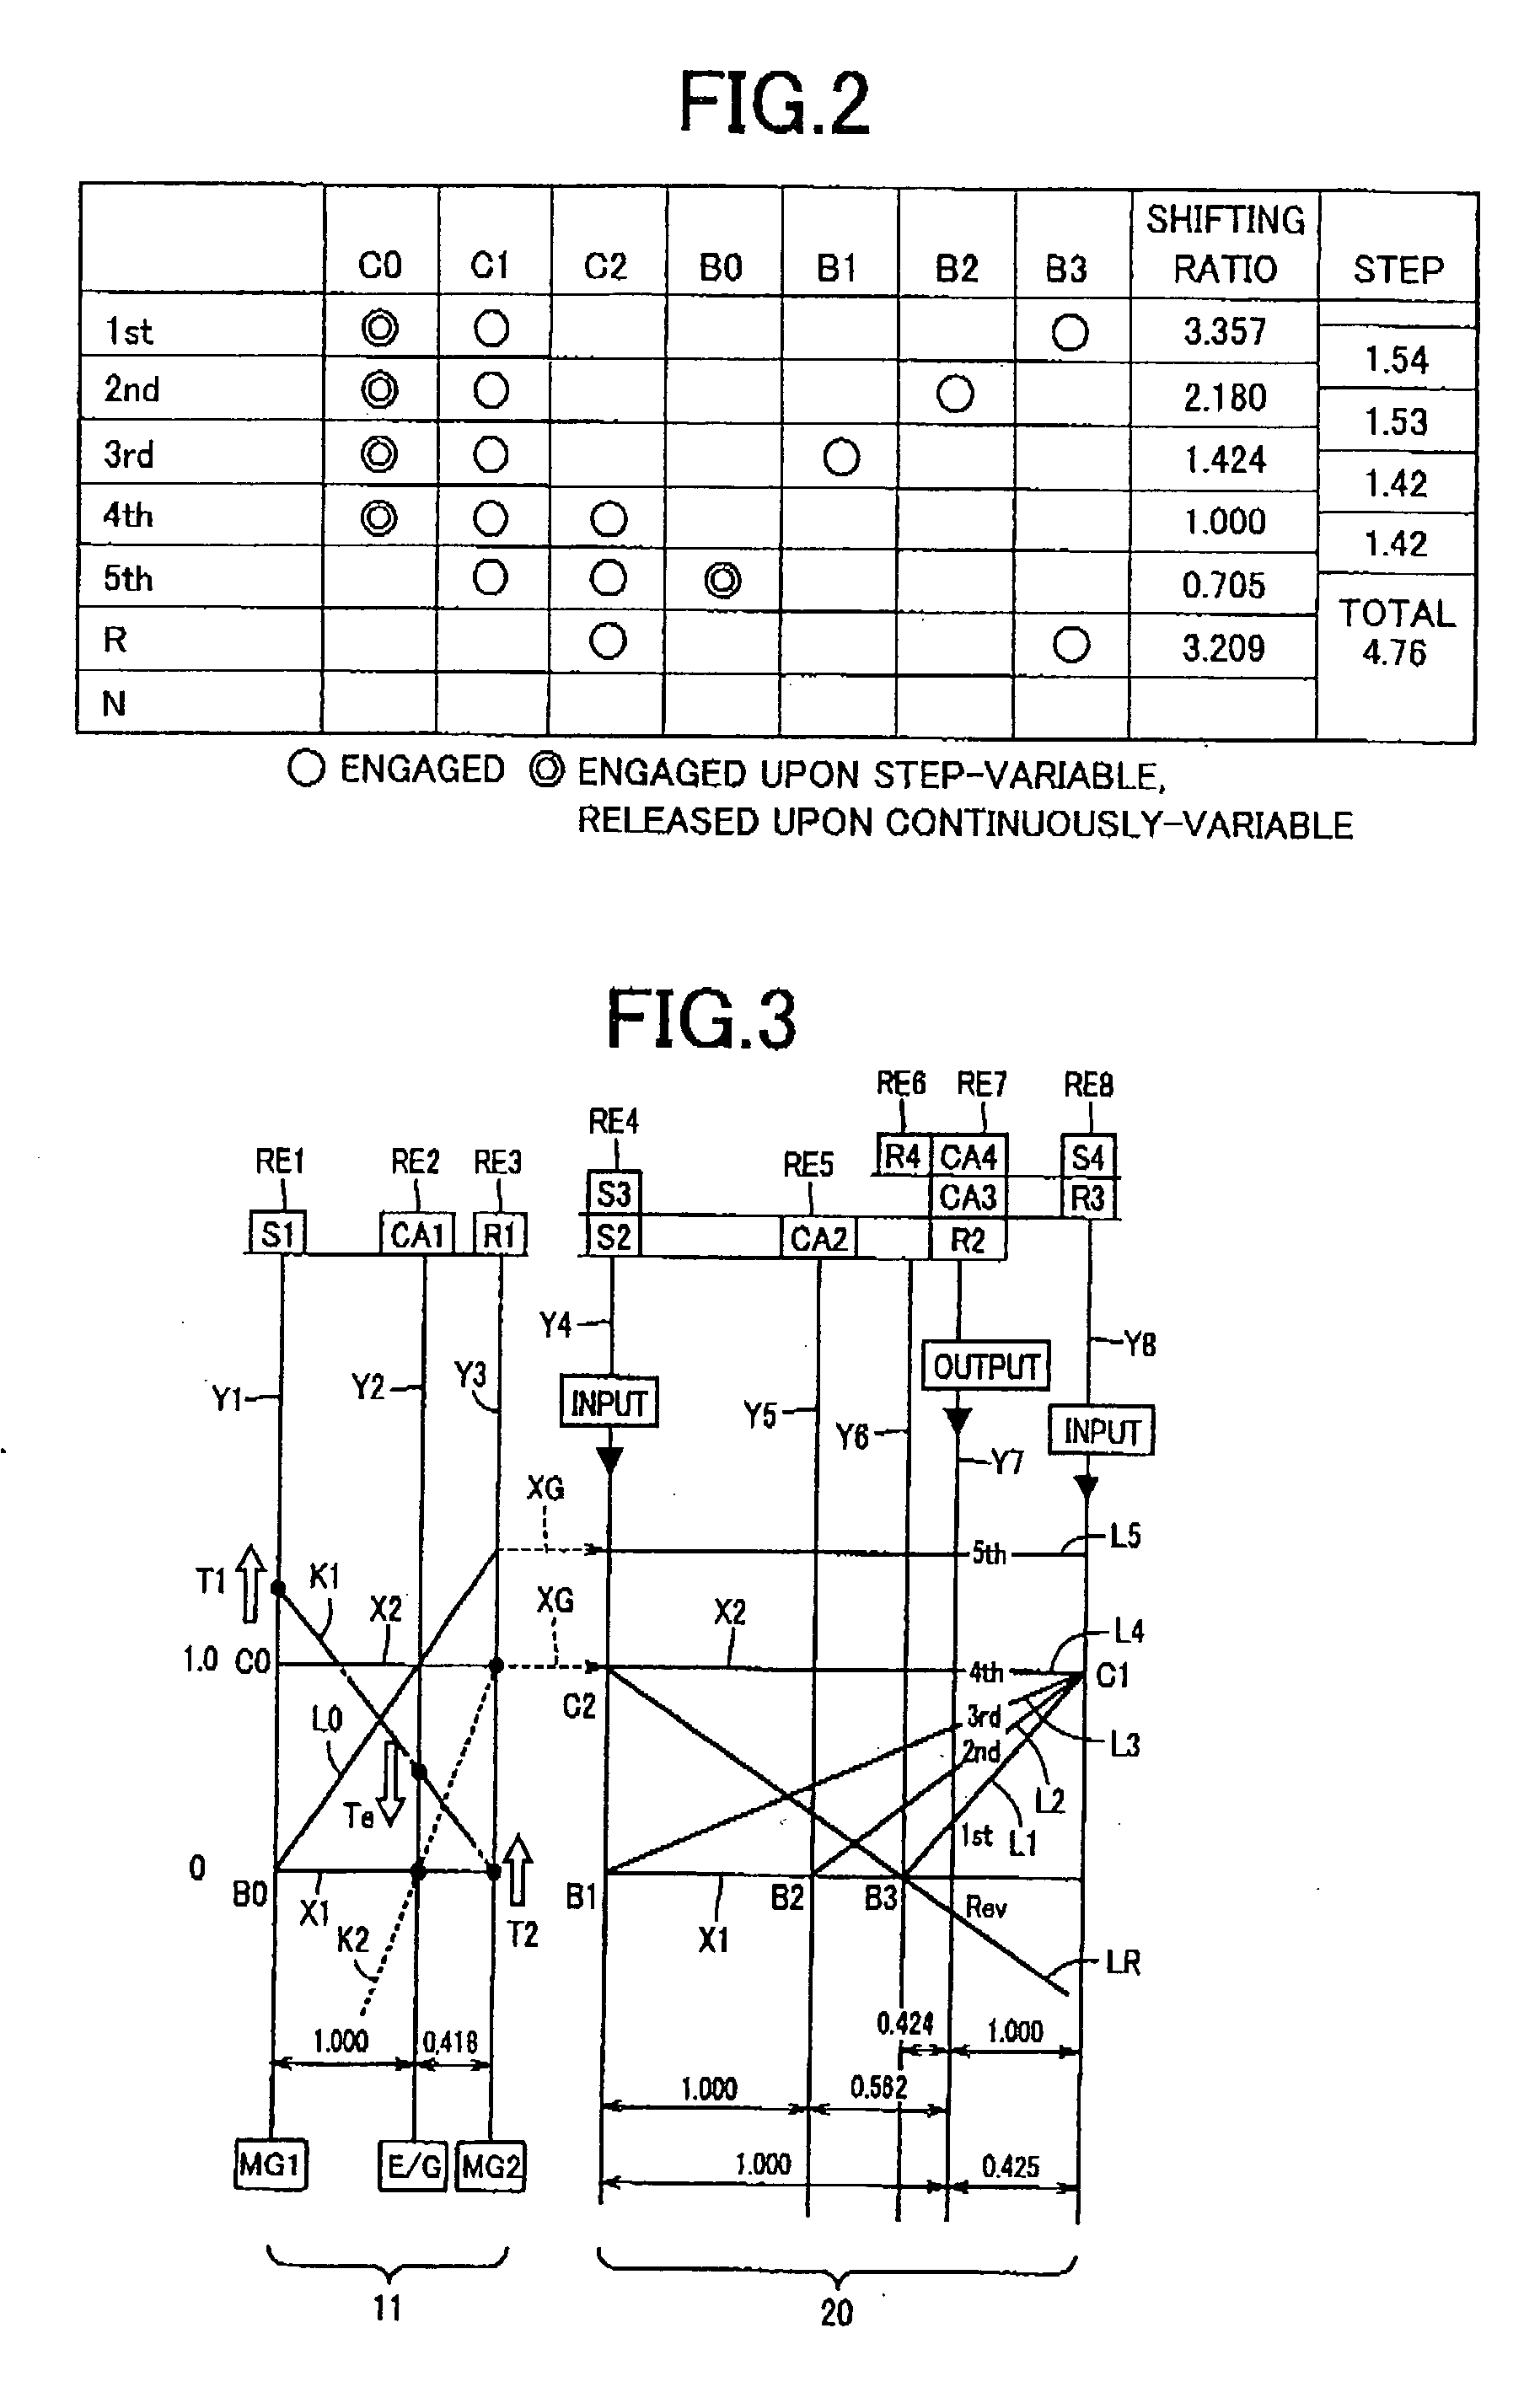 Engine startup control device for vehicle